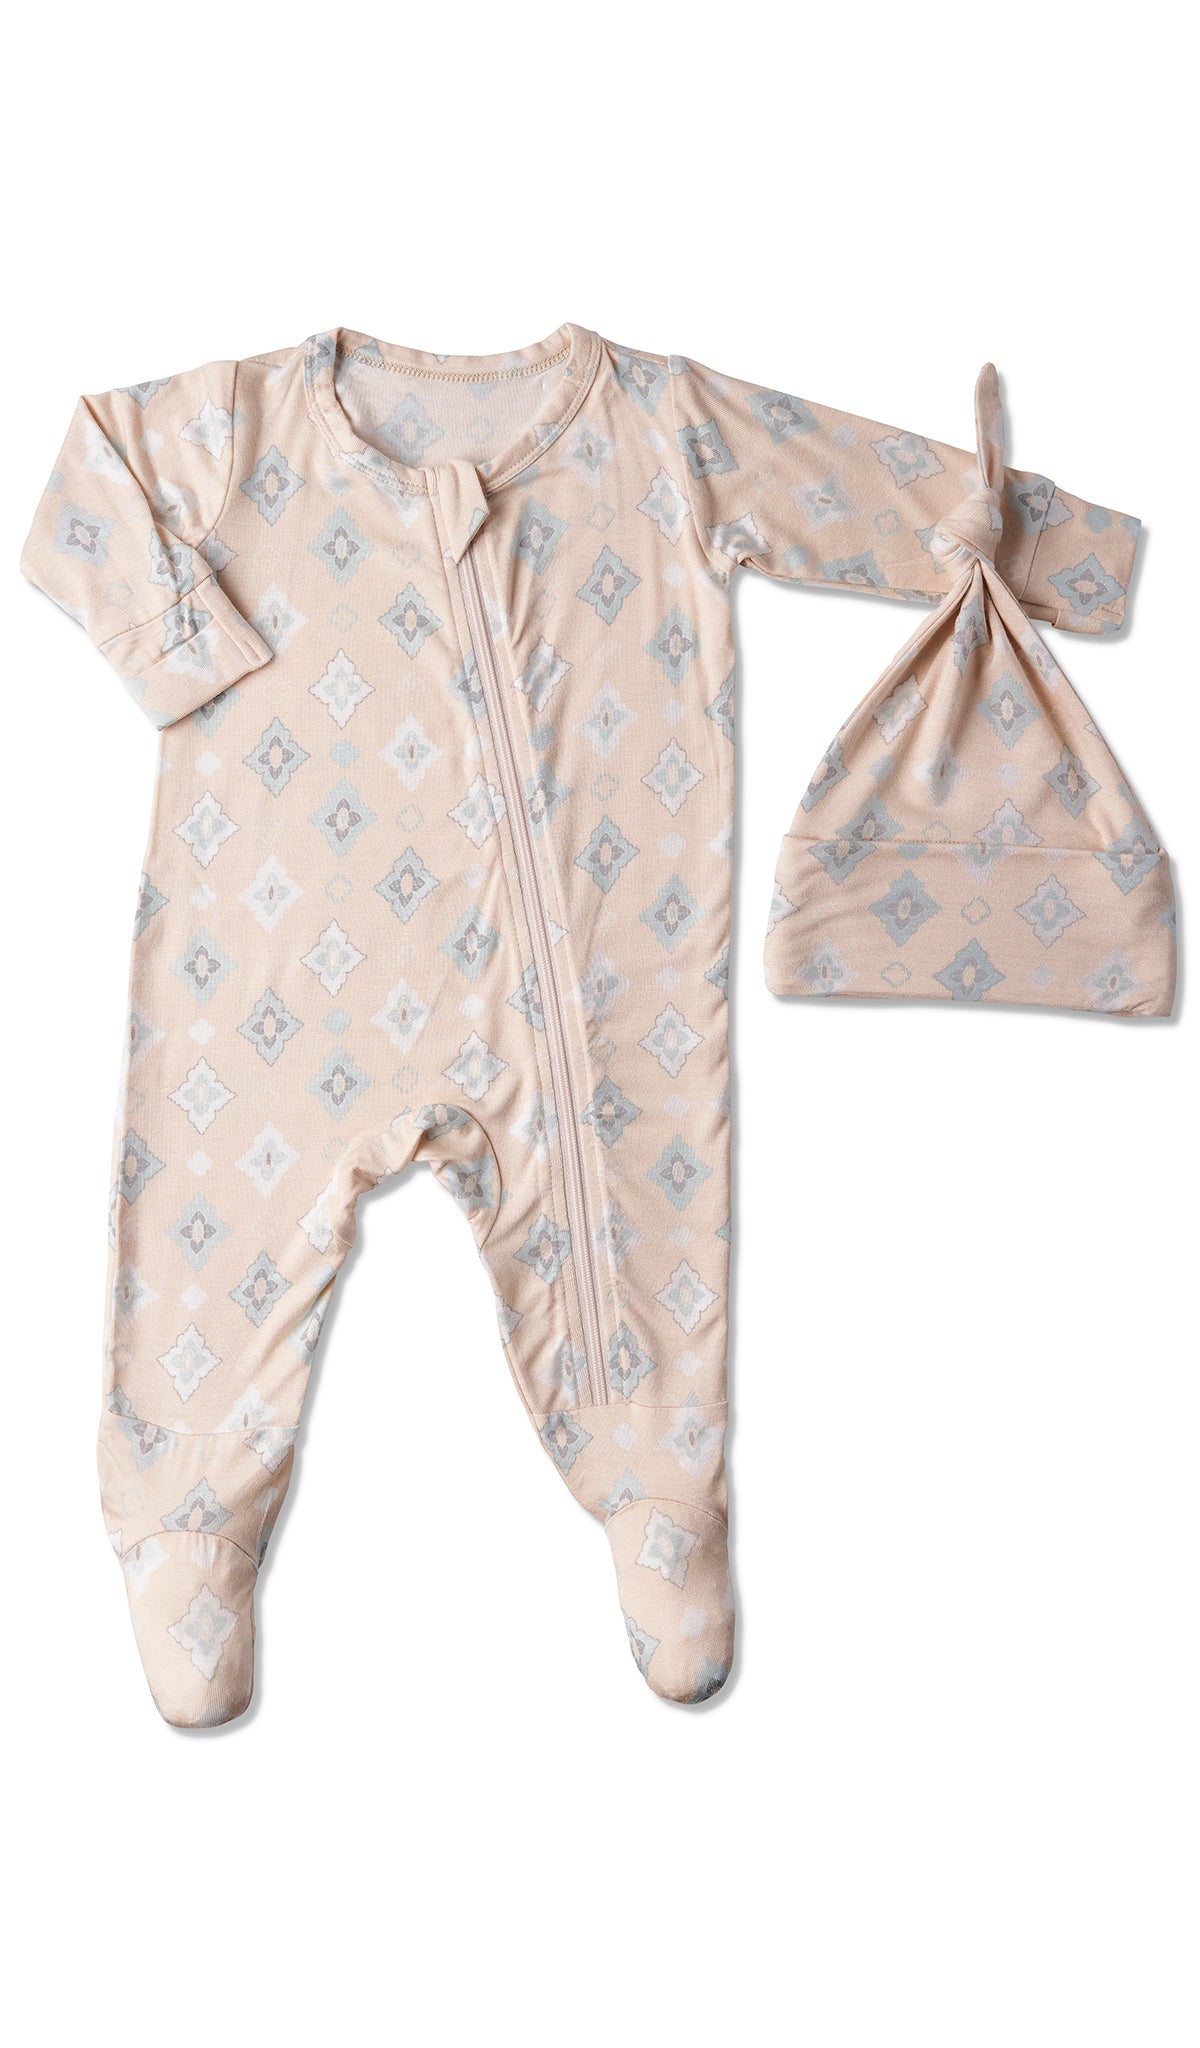 Mosaic Footie 2-Piece with long sleeves, zip front and matching knotted baby hat.